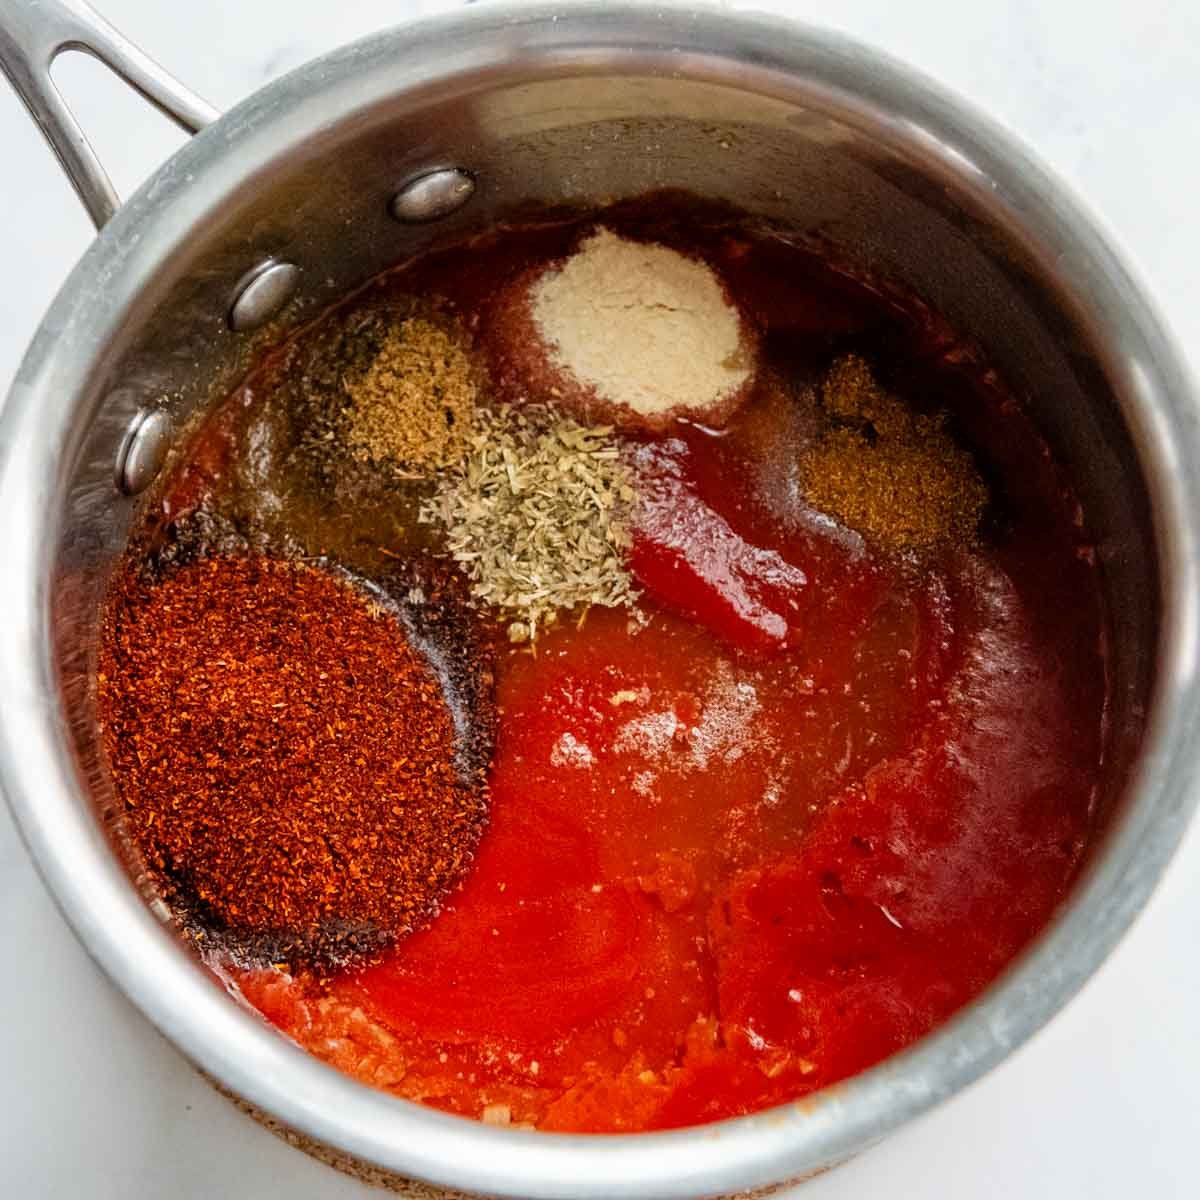 the tomato sauce and spices in a saucepan.